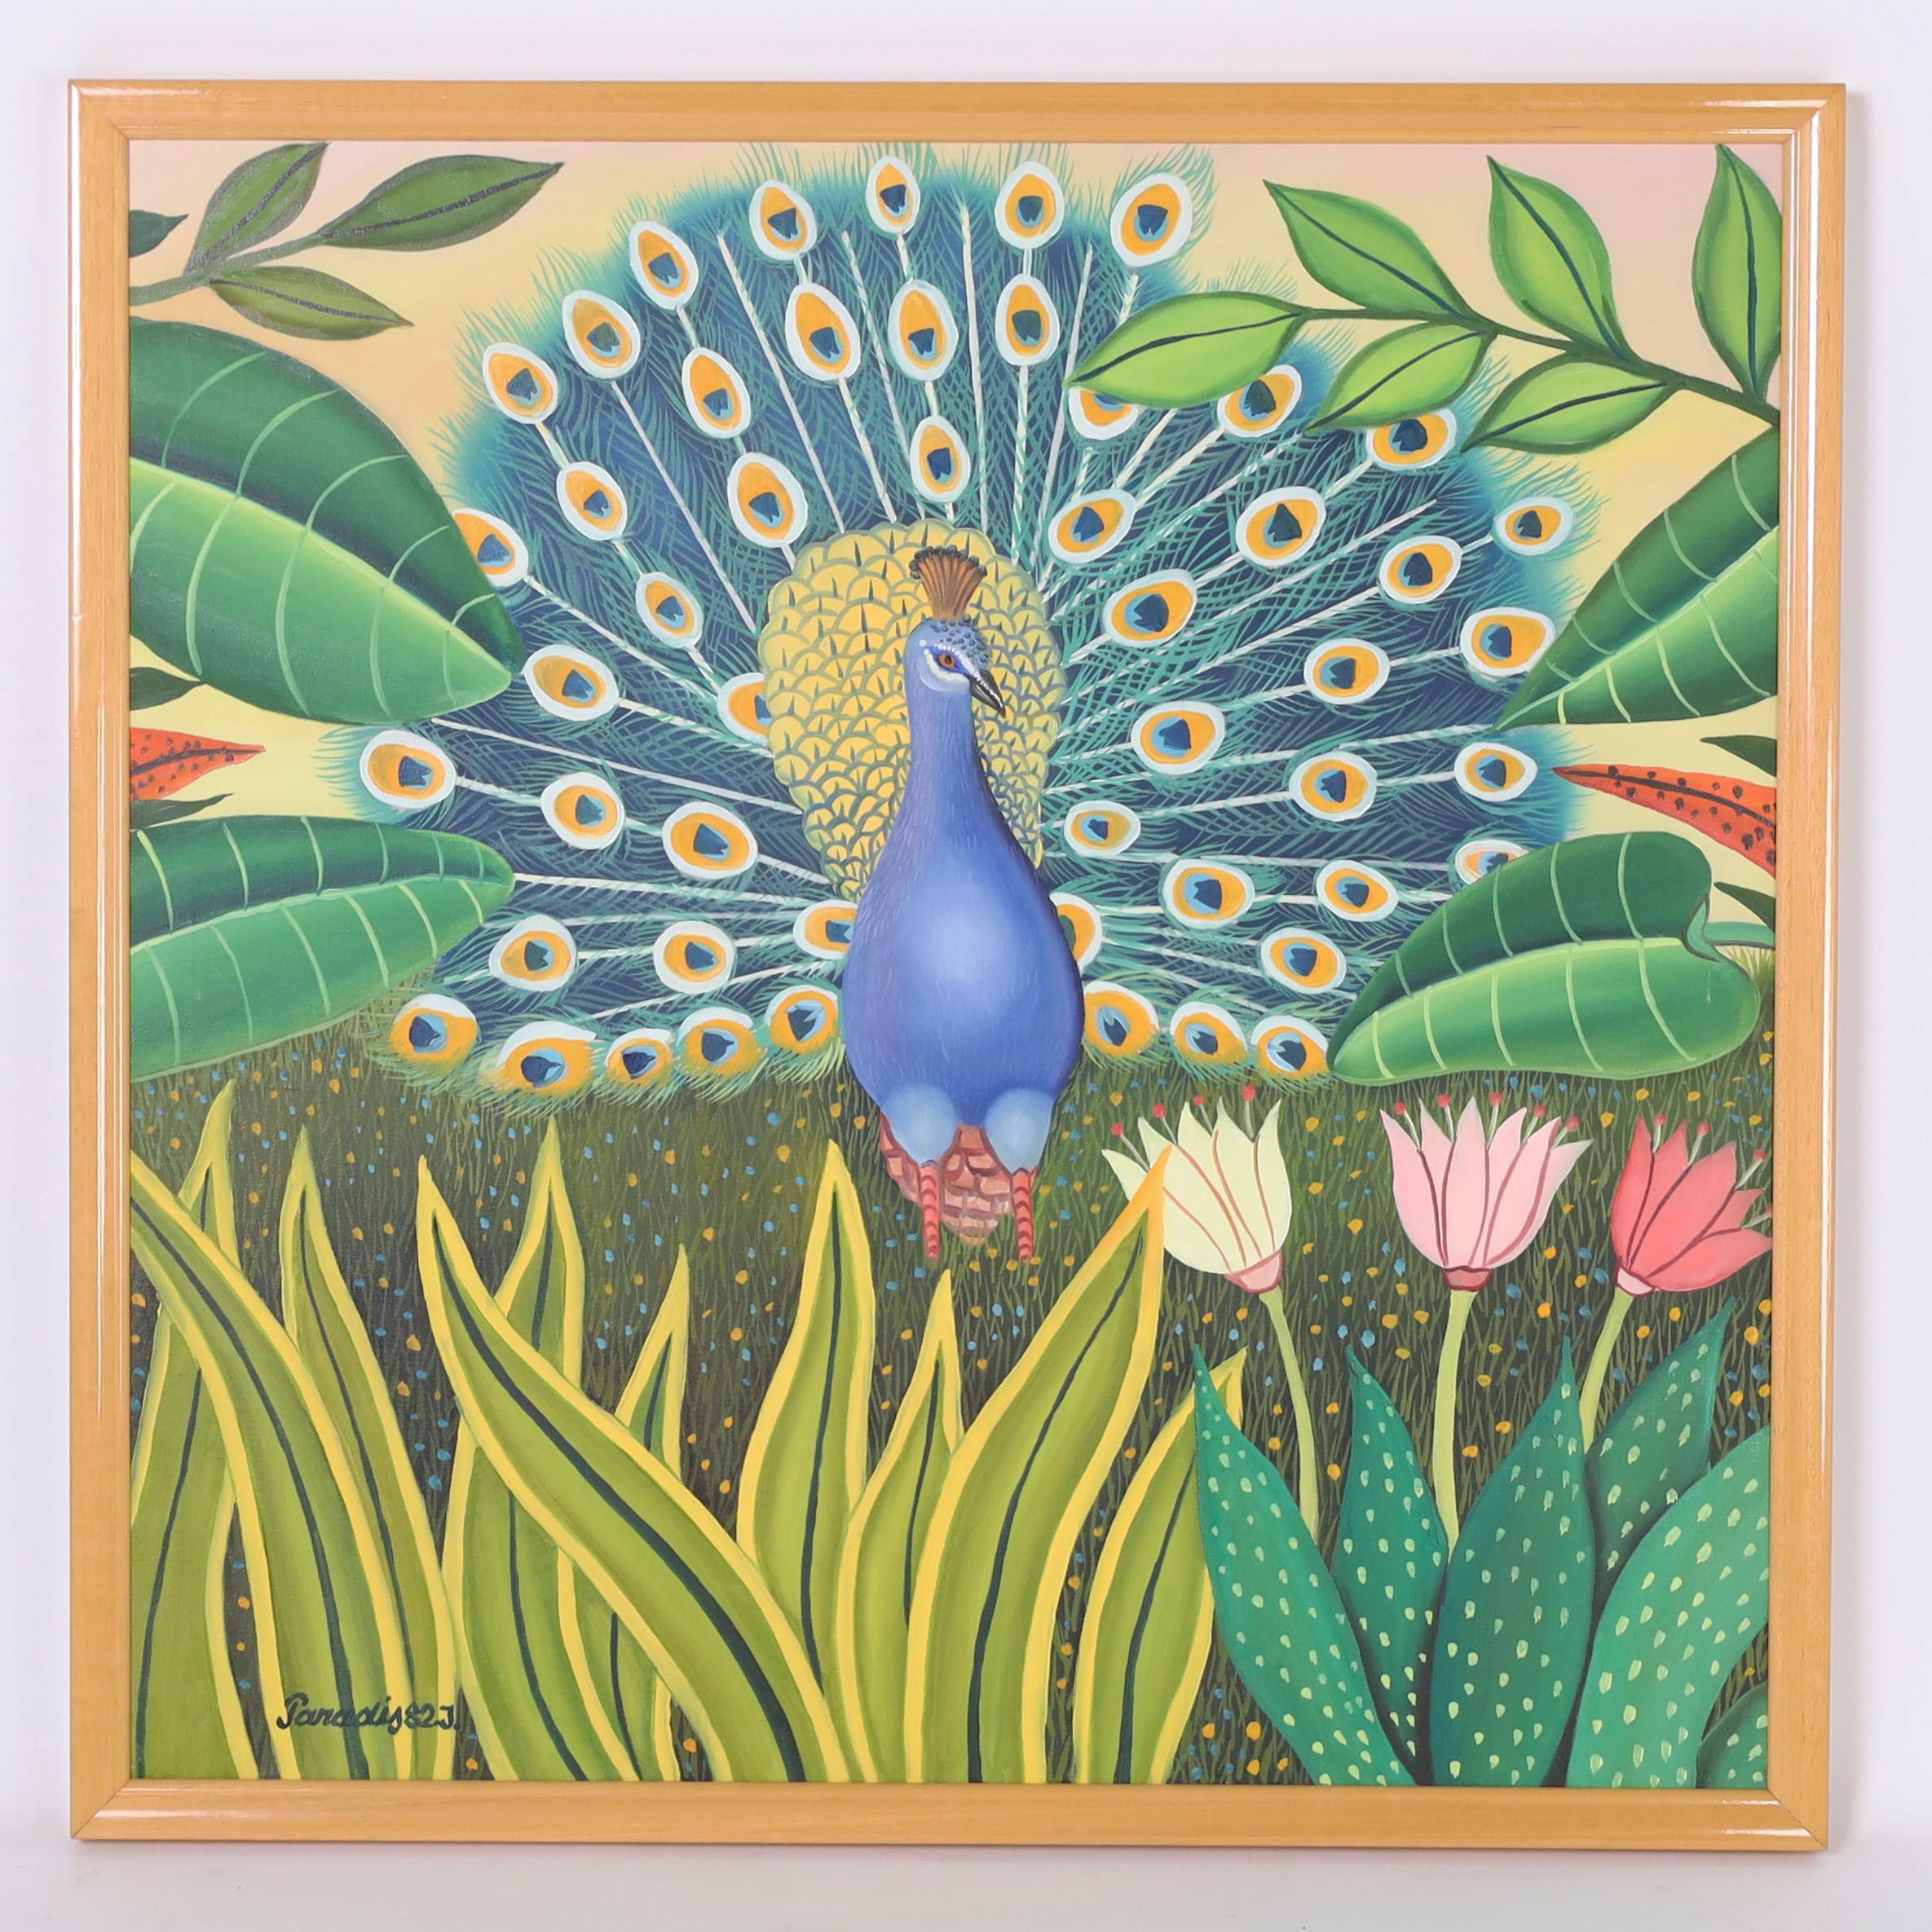 Eye catching acrylic painting on canvas of a peacock showing off his feathers in a fantasy floral setting executed in a charming naive style. Signed Paradis 82 and presented in a wood frame.